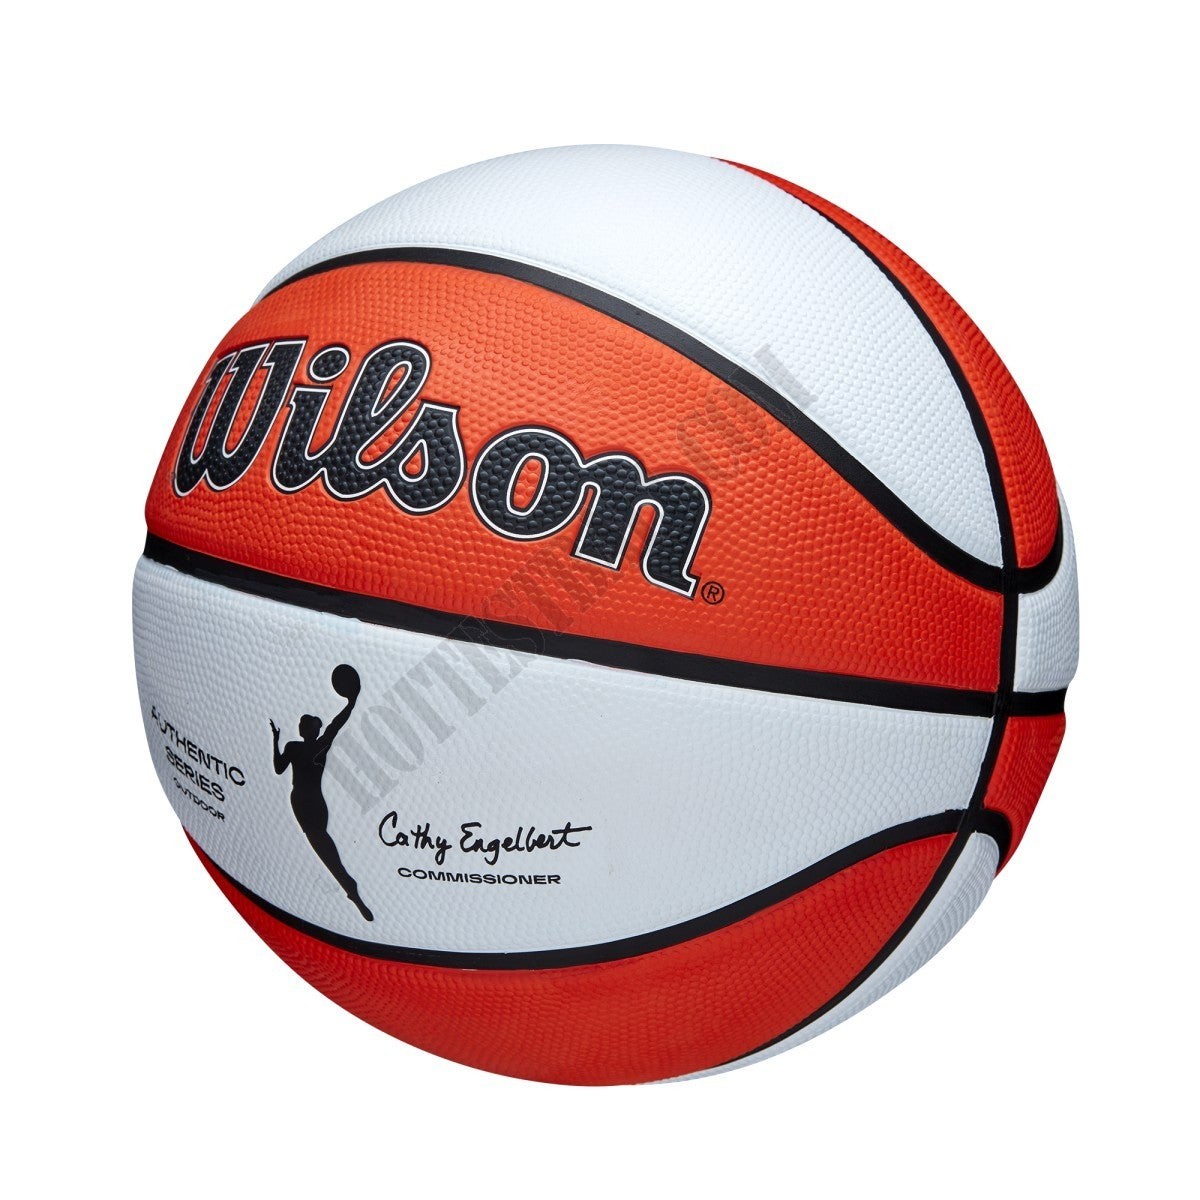 WNBA Authentic Outdoor Basketball - Wilson Discount Store - -3